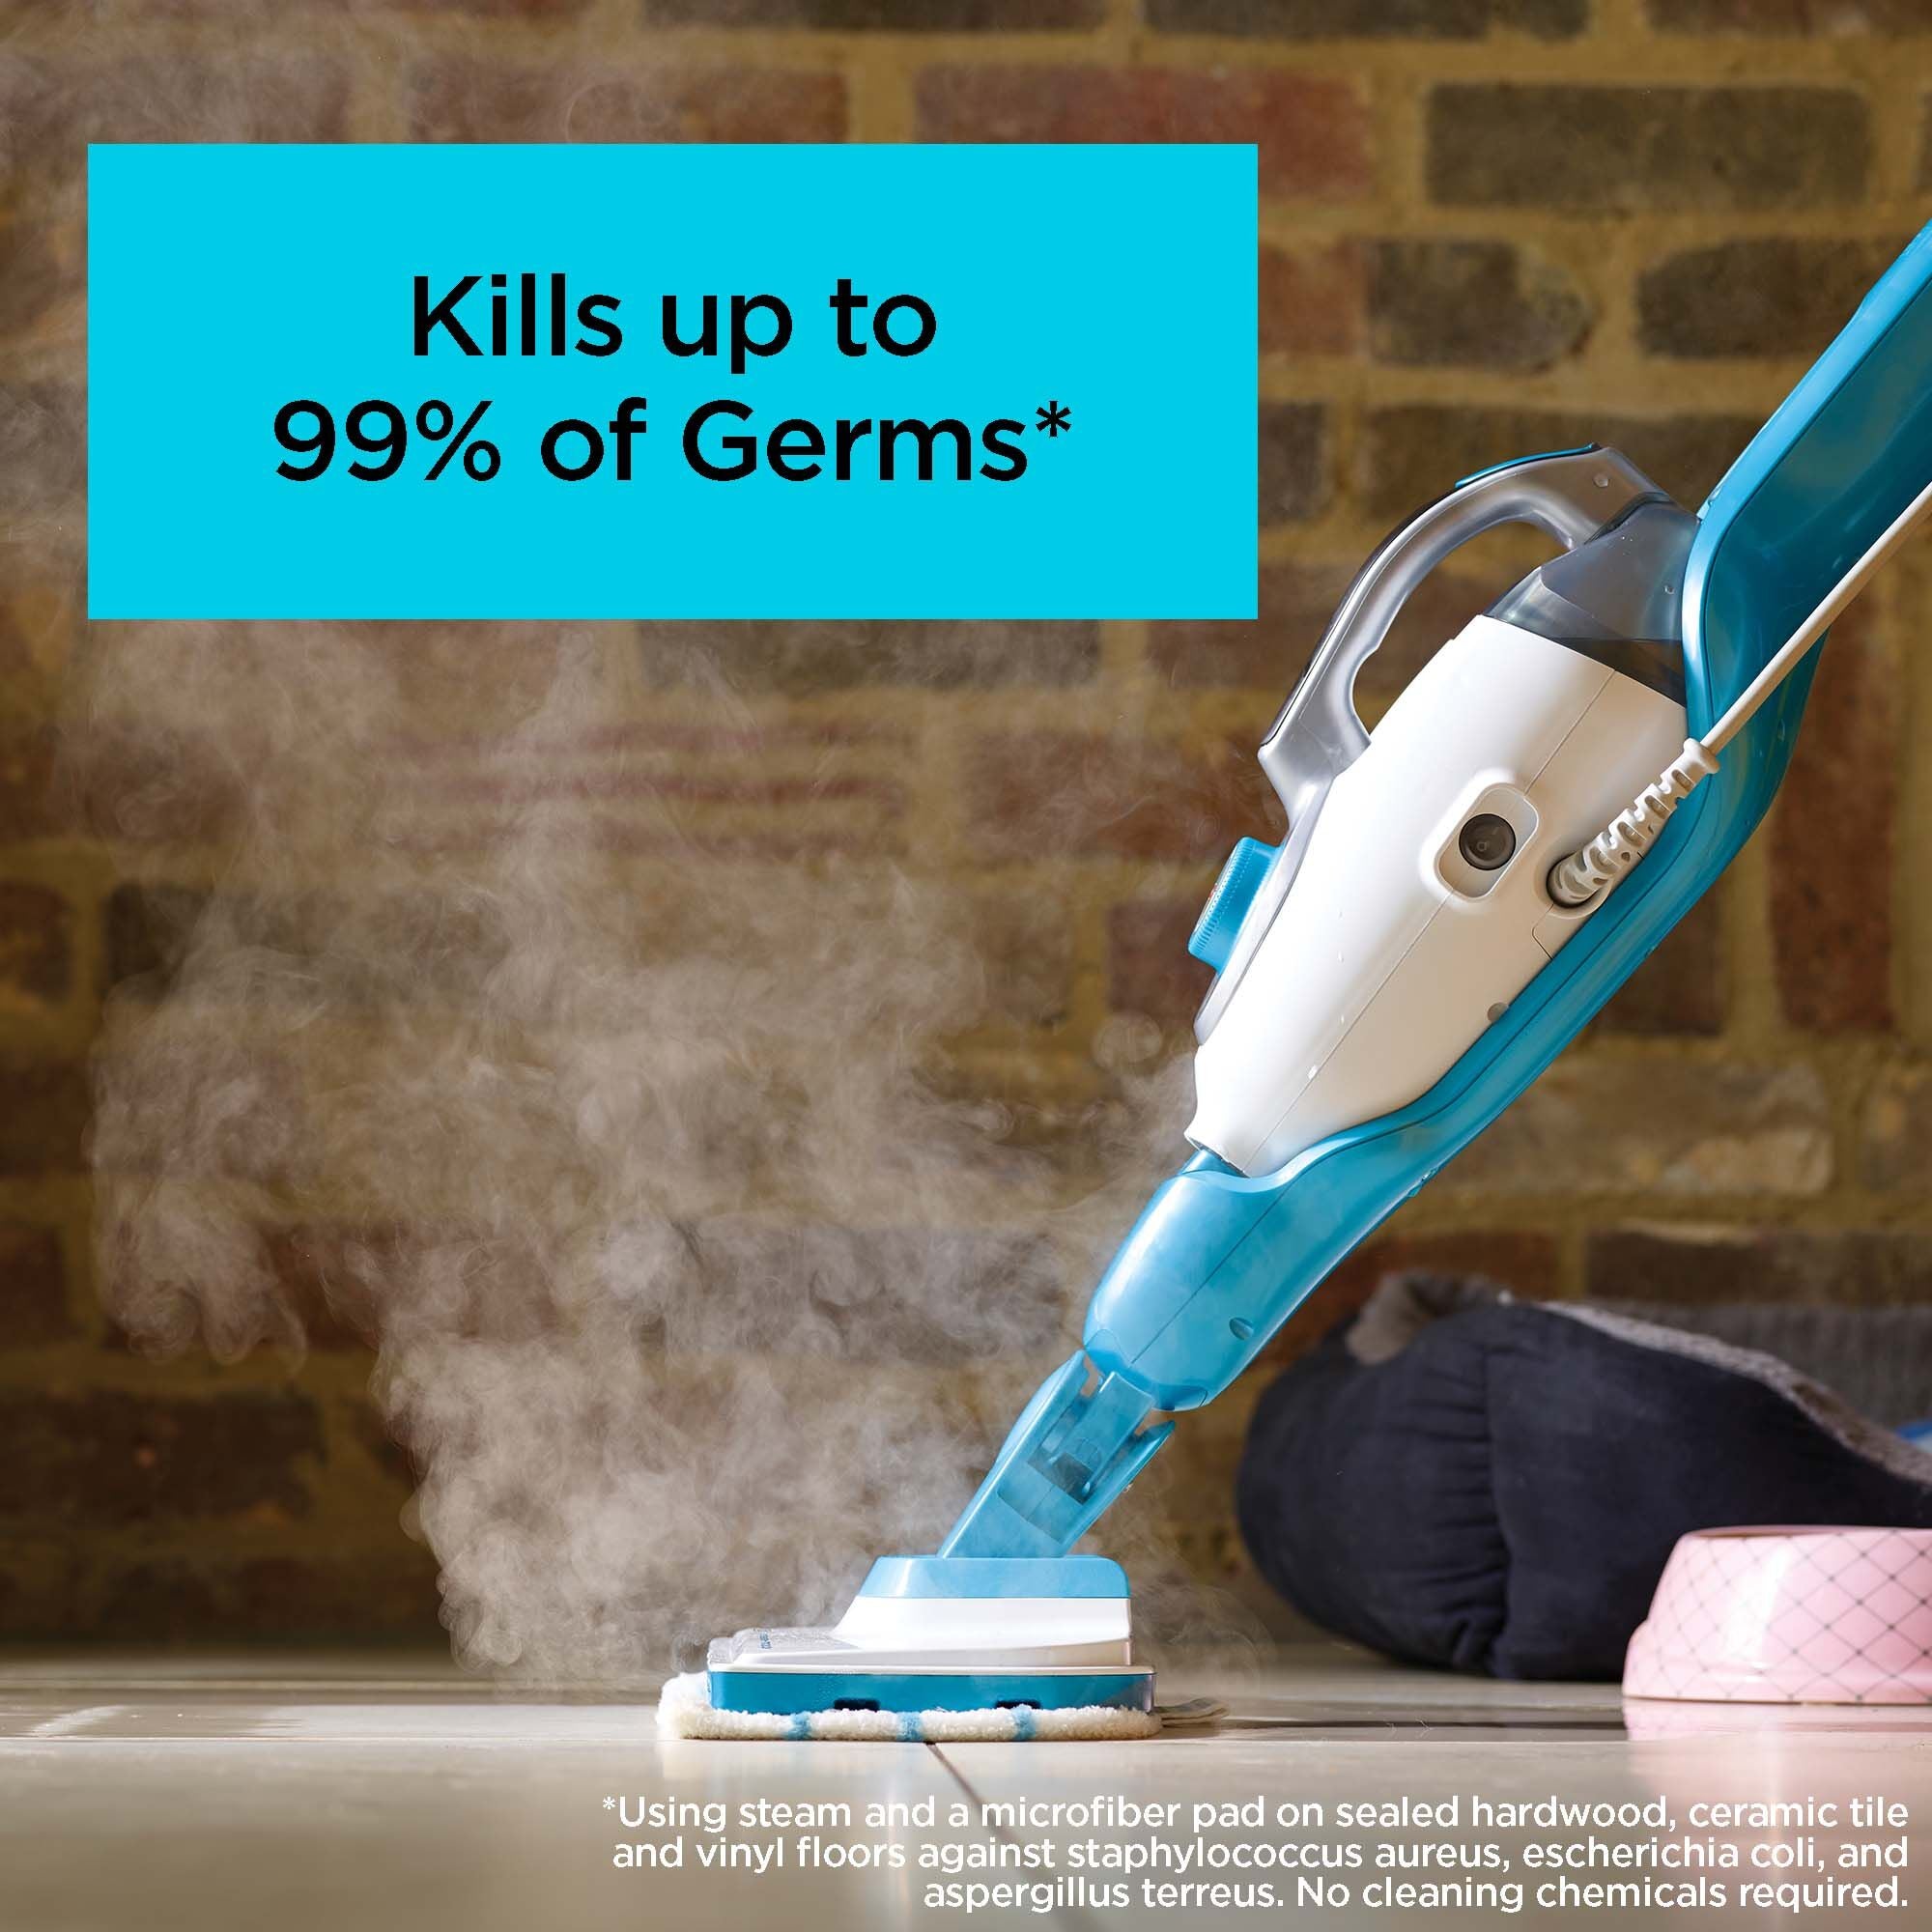 Talent using the BLACK + DECKER™ steam mop to clean a ceramic tile floor, which kills up to 99% of germs